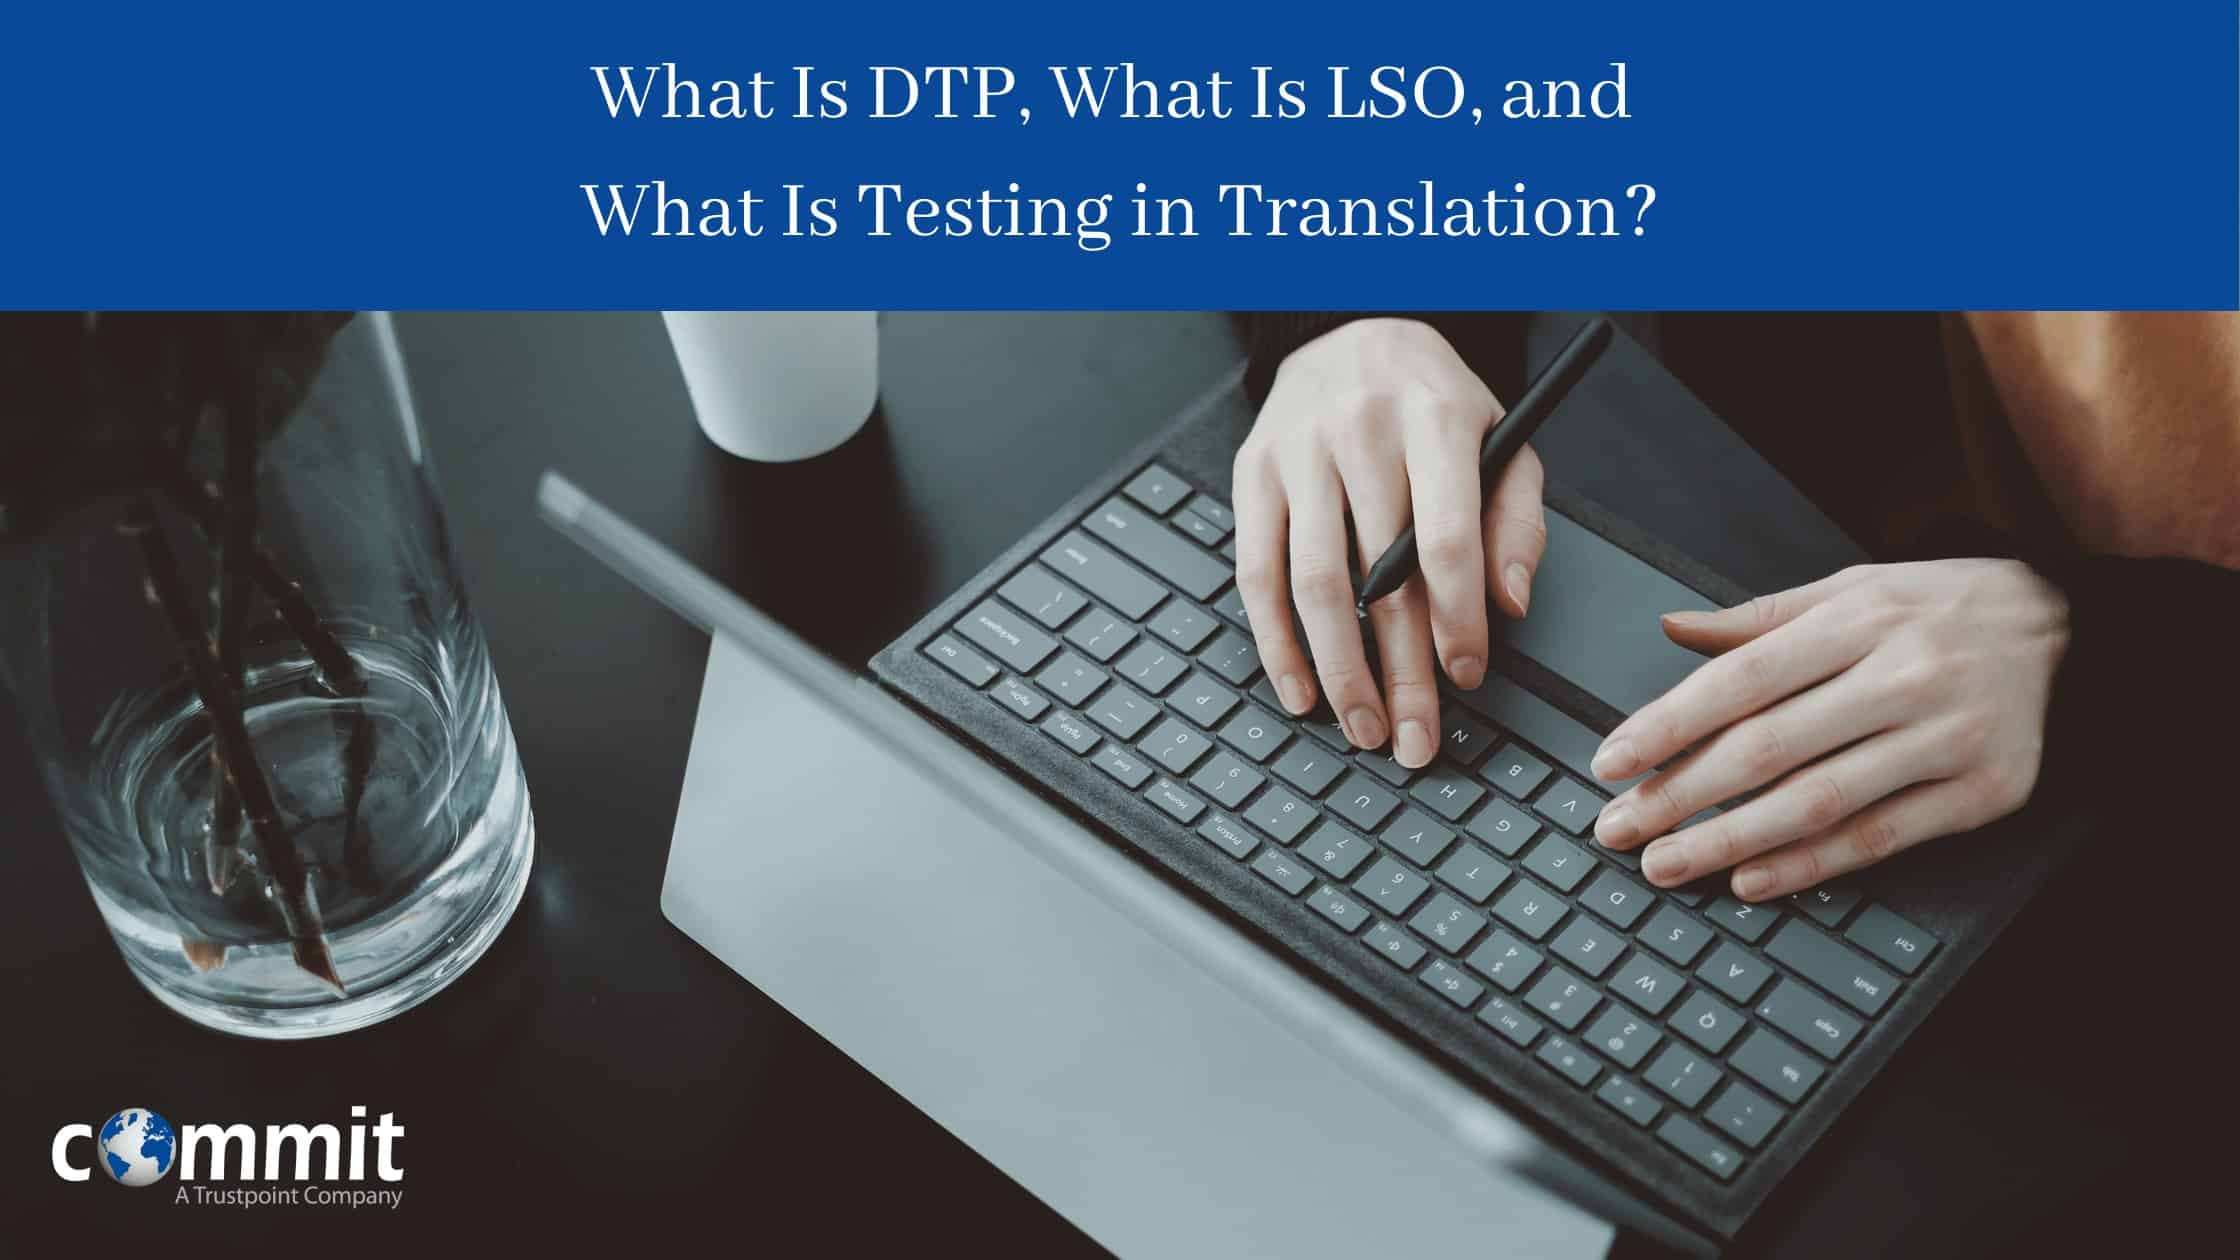 What Is DTP, LSO, and Testing in Translation?